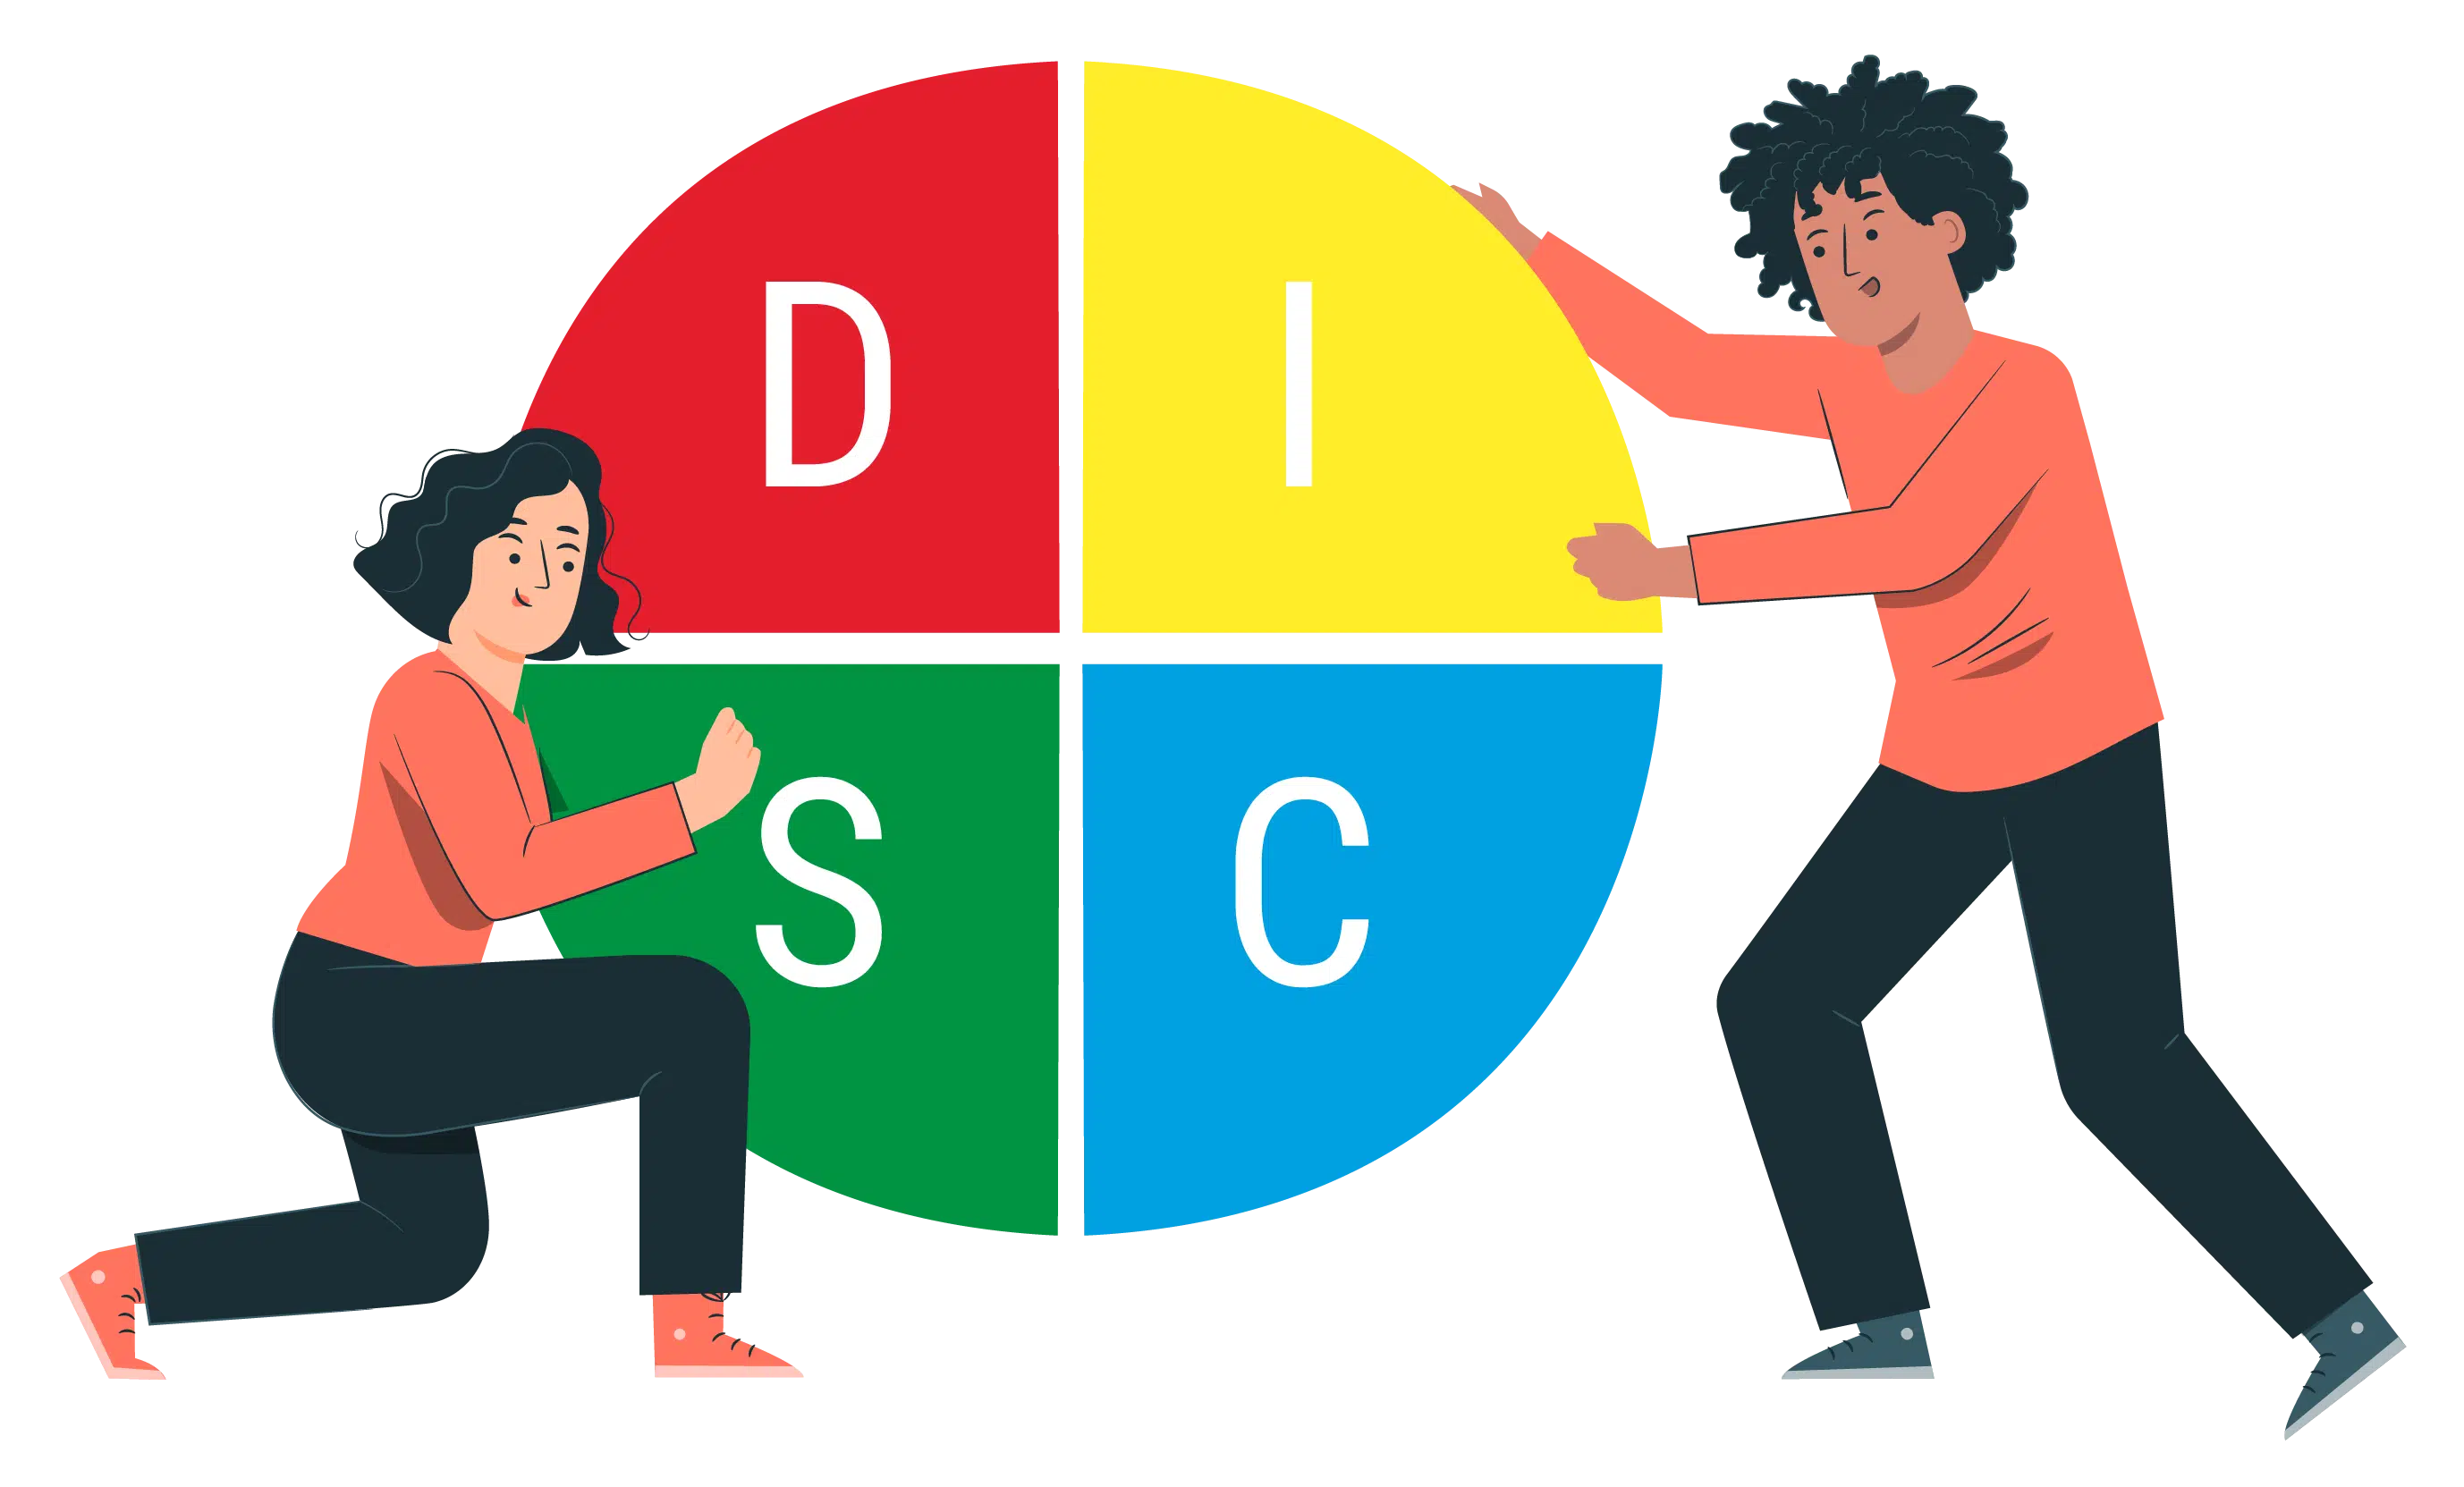 DiSC Profiling: The Definitive Guide disc profiling